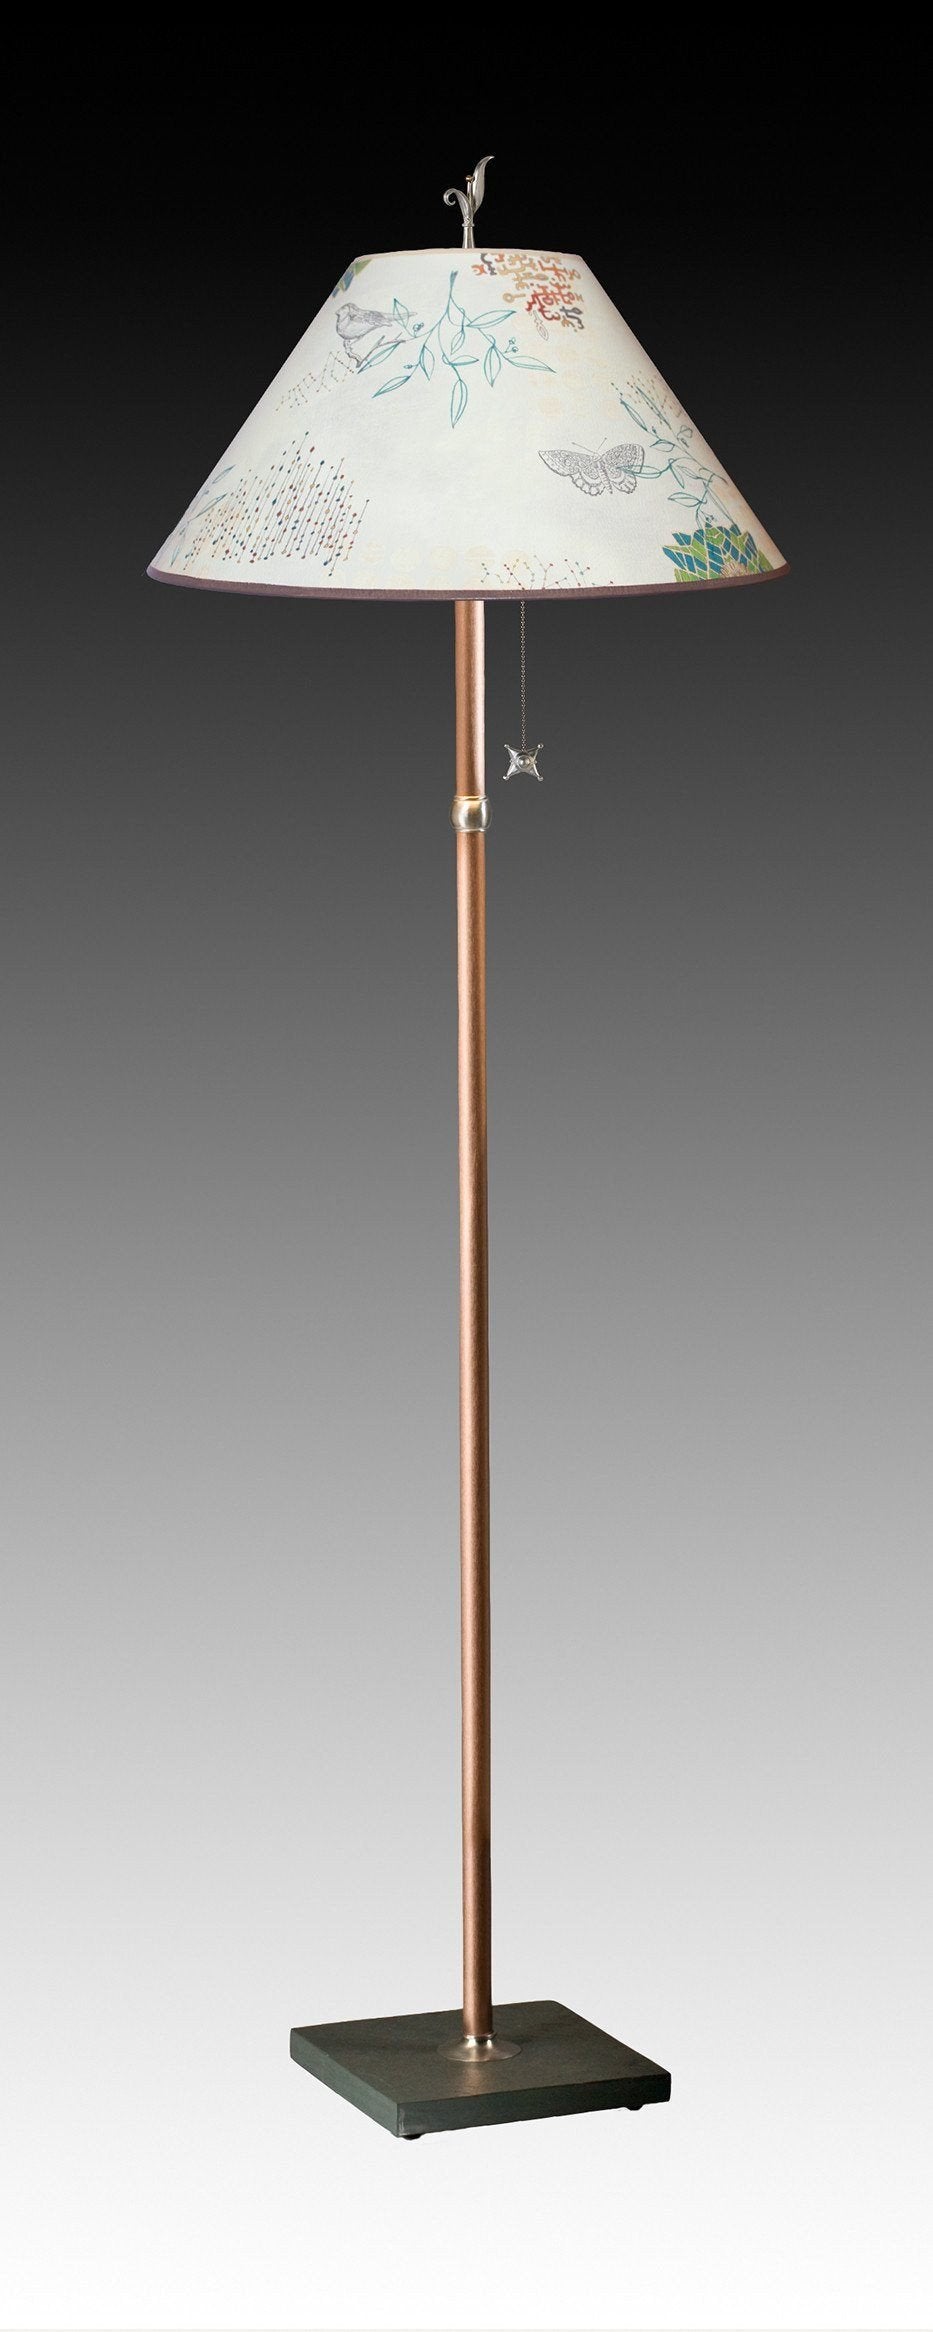 Copper Floor Lamp with Large Conical Shade in Ecru Journey